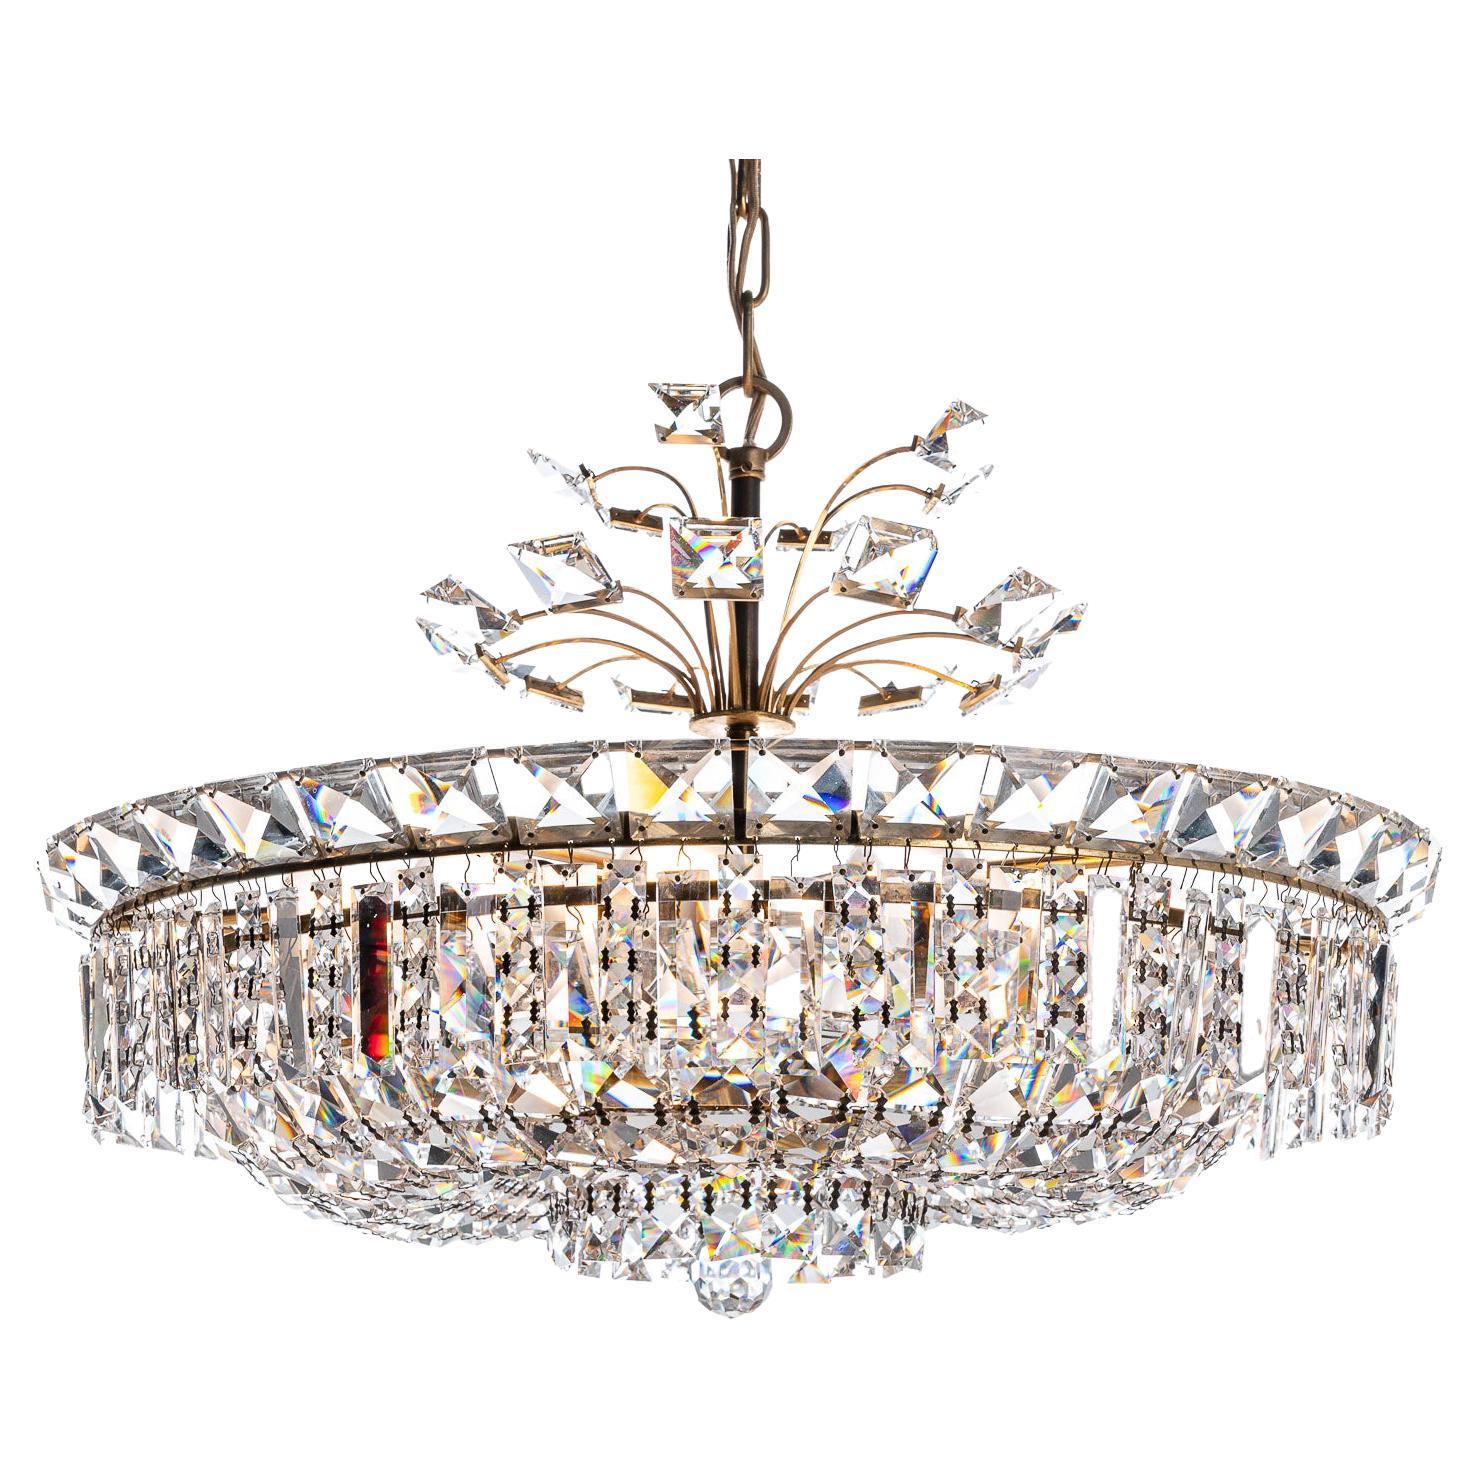 This opulent and unique piece is sure to catch the eye. The dazzling crystal glass-work diffuses the light in a beautiful way with a prismatic and shimmering effect.
It also has stunning decorative petal-like design work on the pendant-shaft for